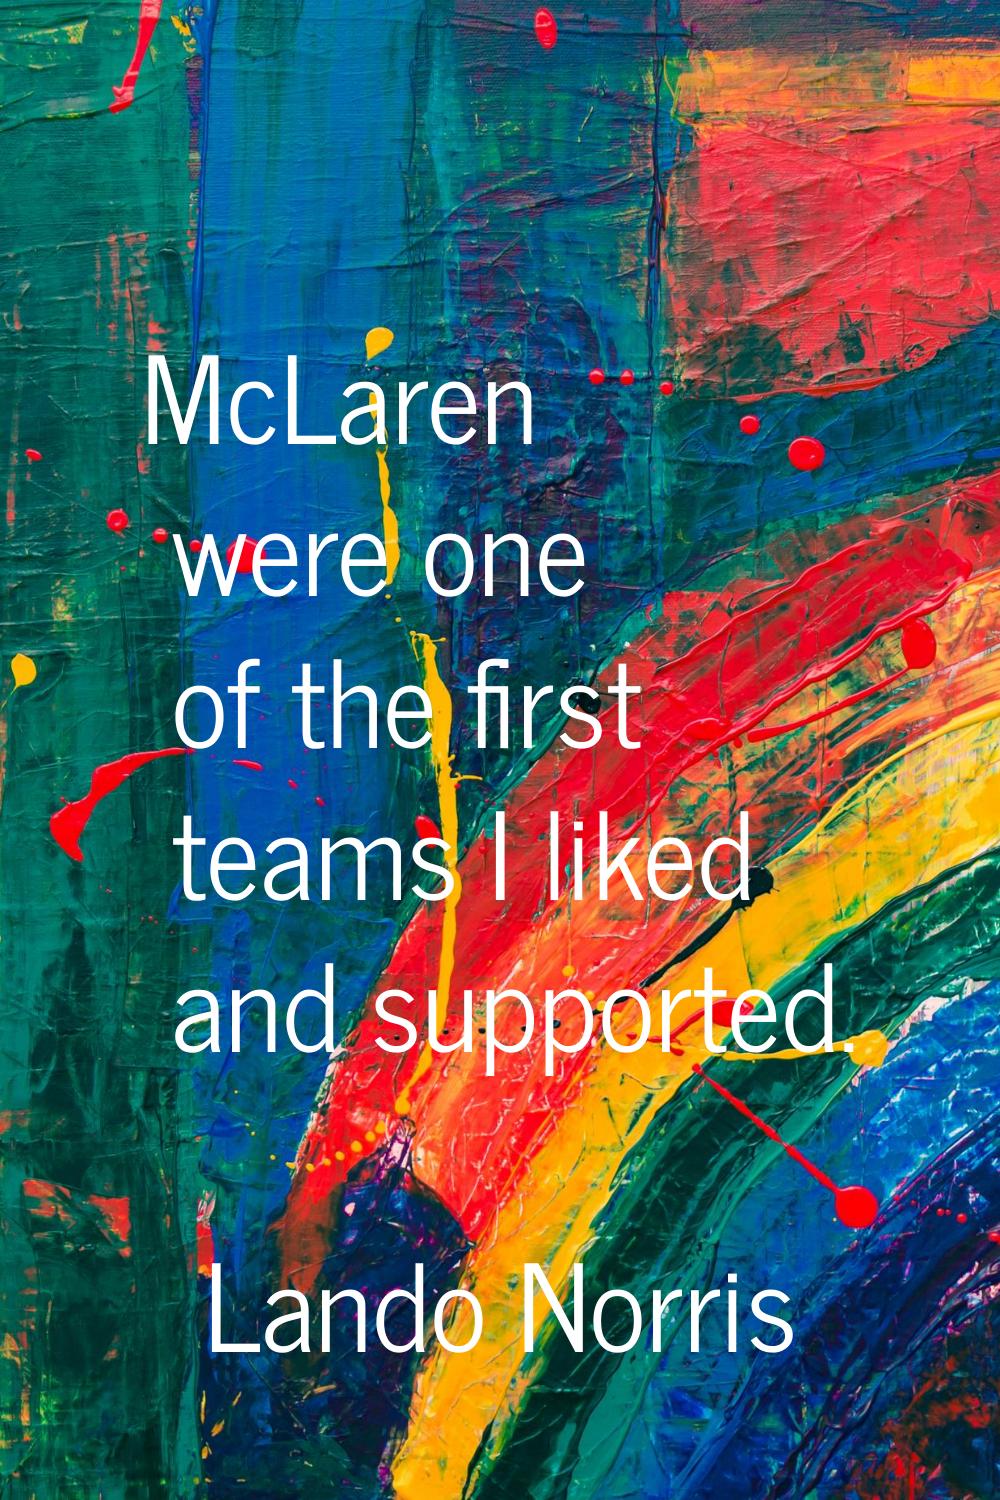 McLaren were one of the first teams I liked and supported.